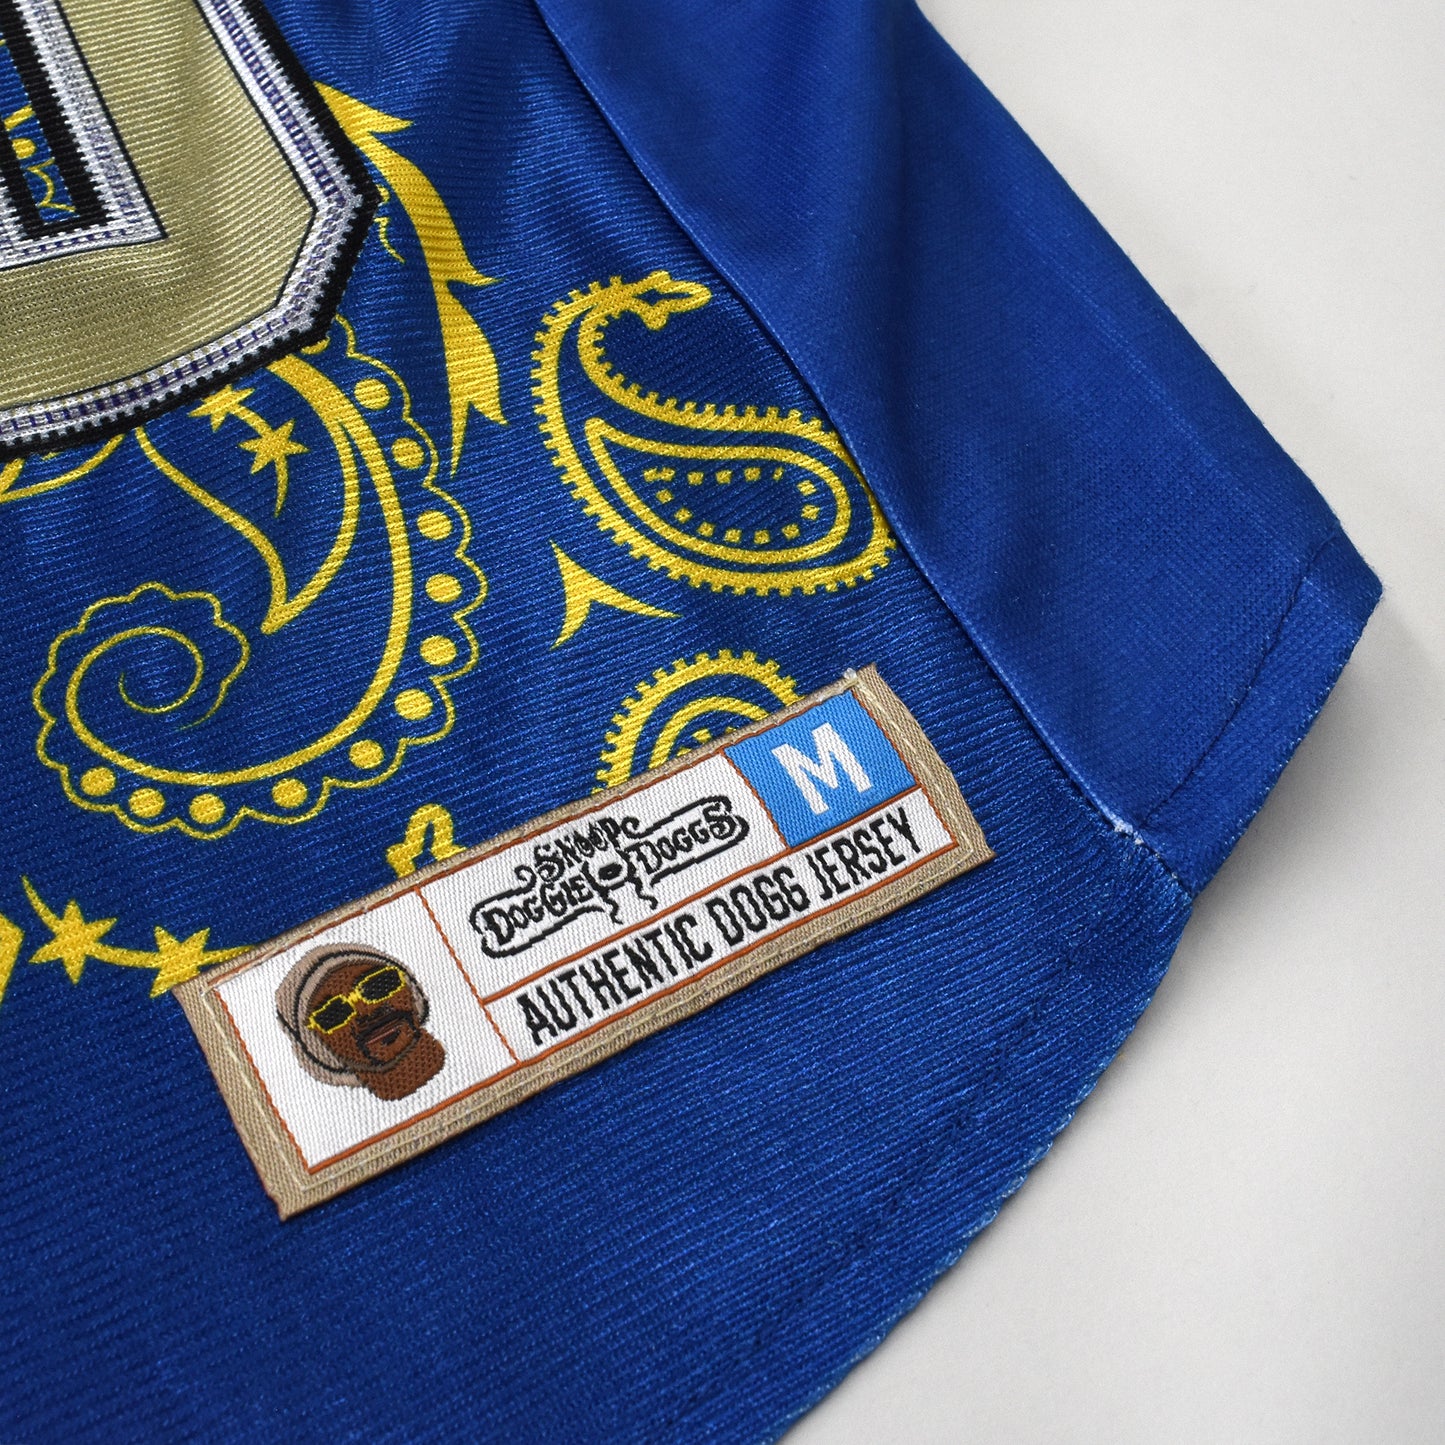 A close up detail image showing design sublimation, stretch fabric, and embroidered jersey tag of the Halftime Deluxe Pet Jersey.